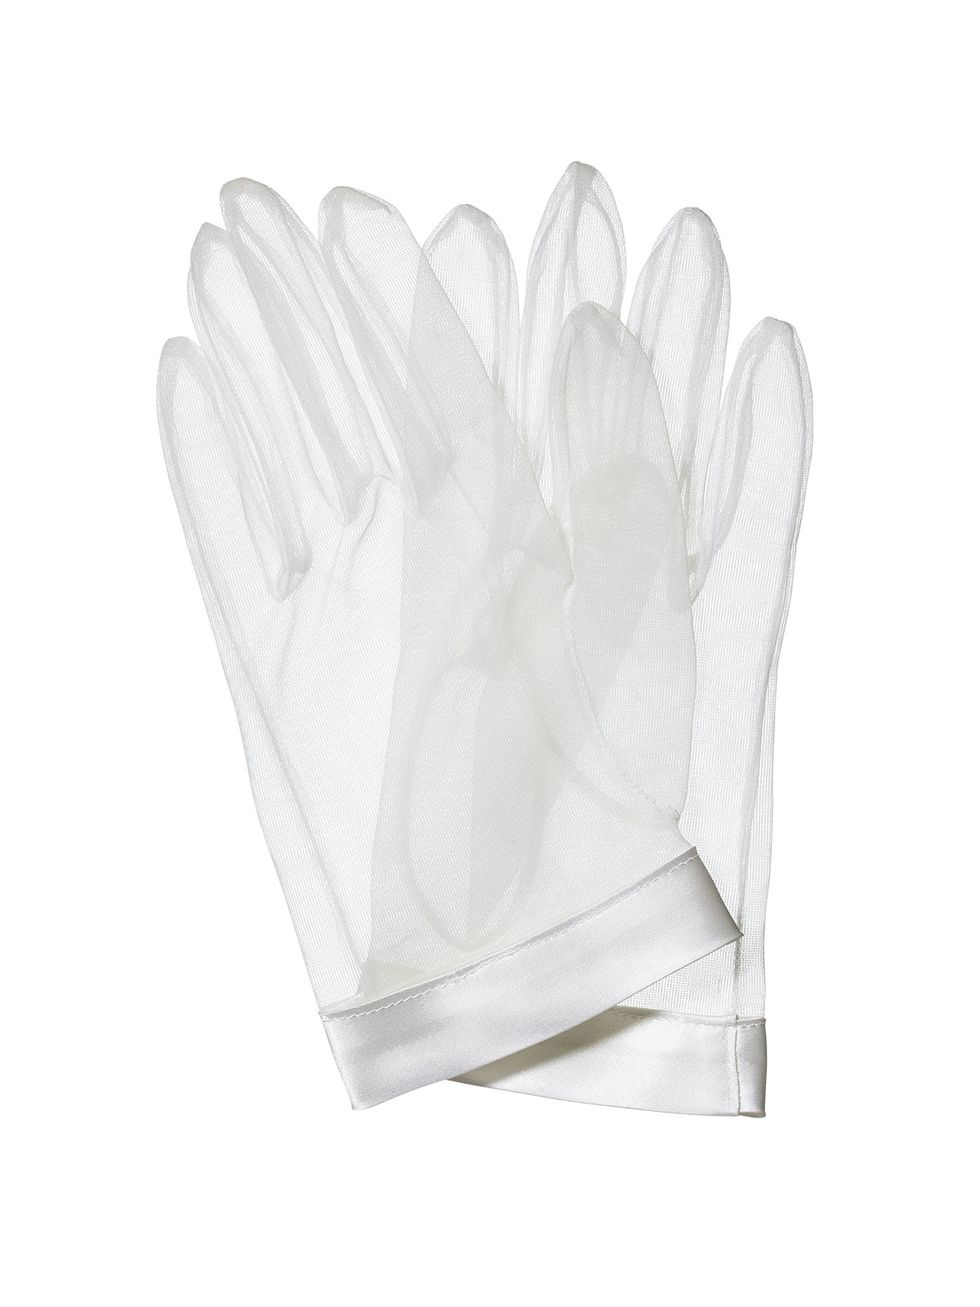 Glove, Safety glove, White, Personal protective equipment, Sports gear, Batting glove, Formal gloves, Fashion accessory, Hand, Latex, 